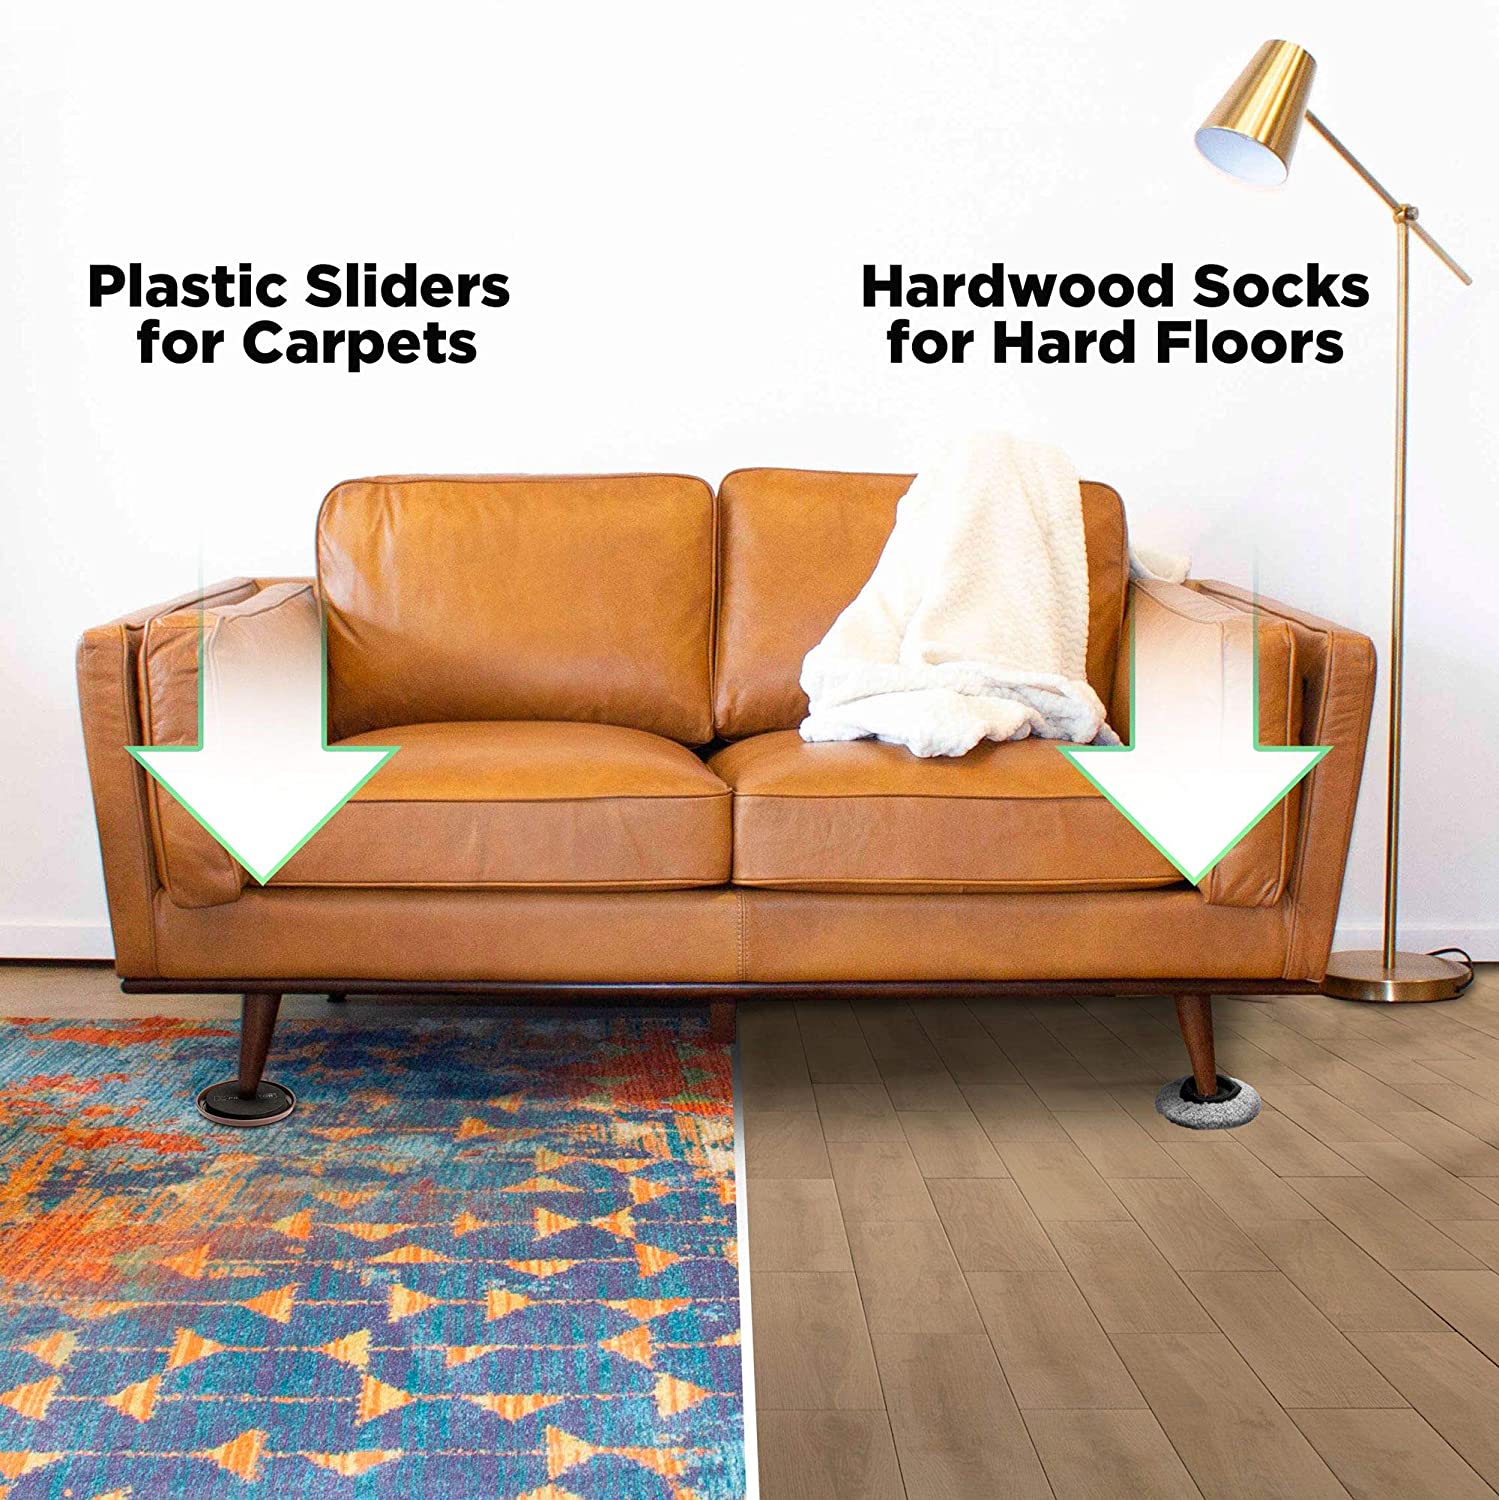 How to Move Furniture on Carpet Best Practices by The Carpet Guys - The  Carpet Guys